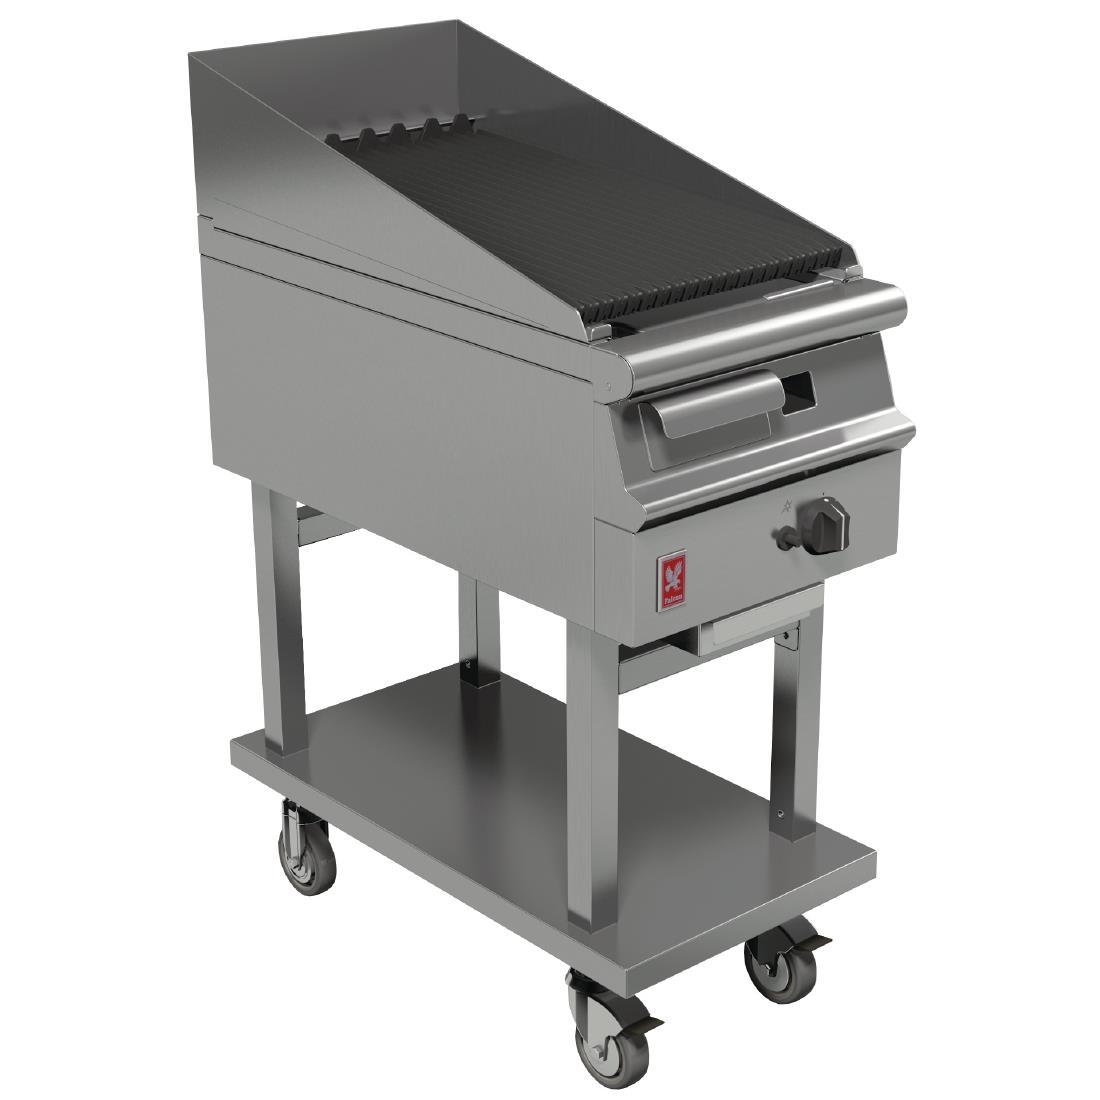 Falcon Dominator Plus Natural Gas Chargrill On Mobile Stand G3425 - GP025-N  - 1